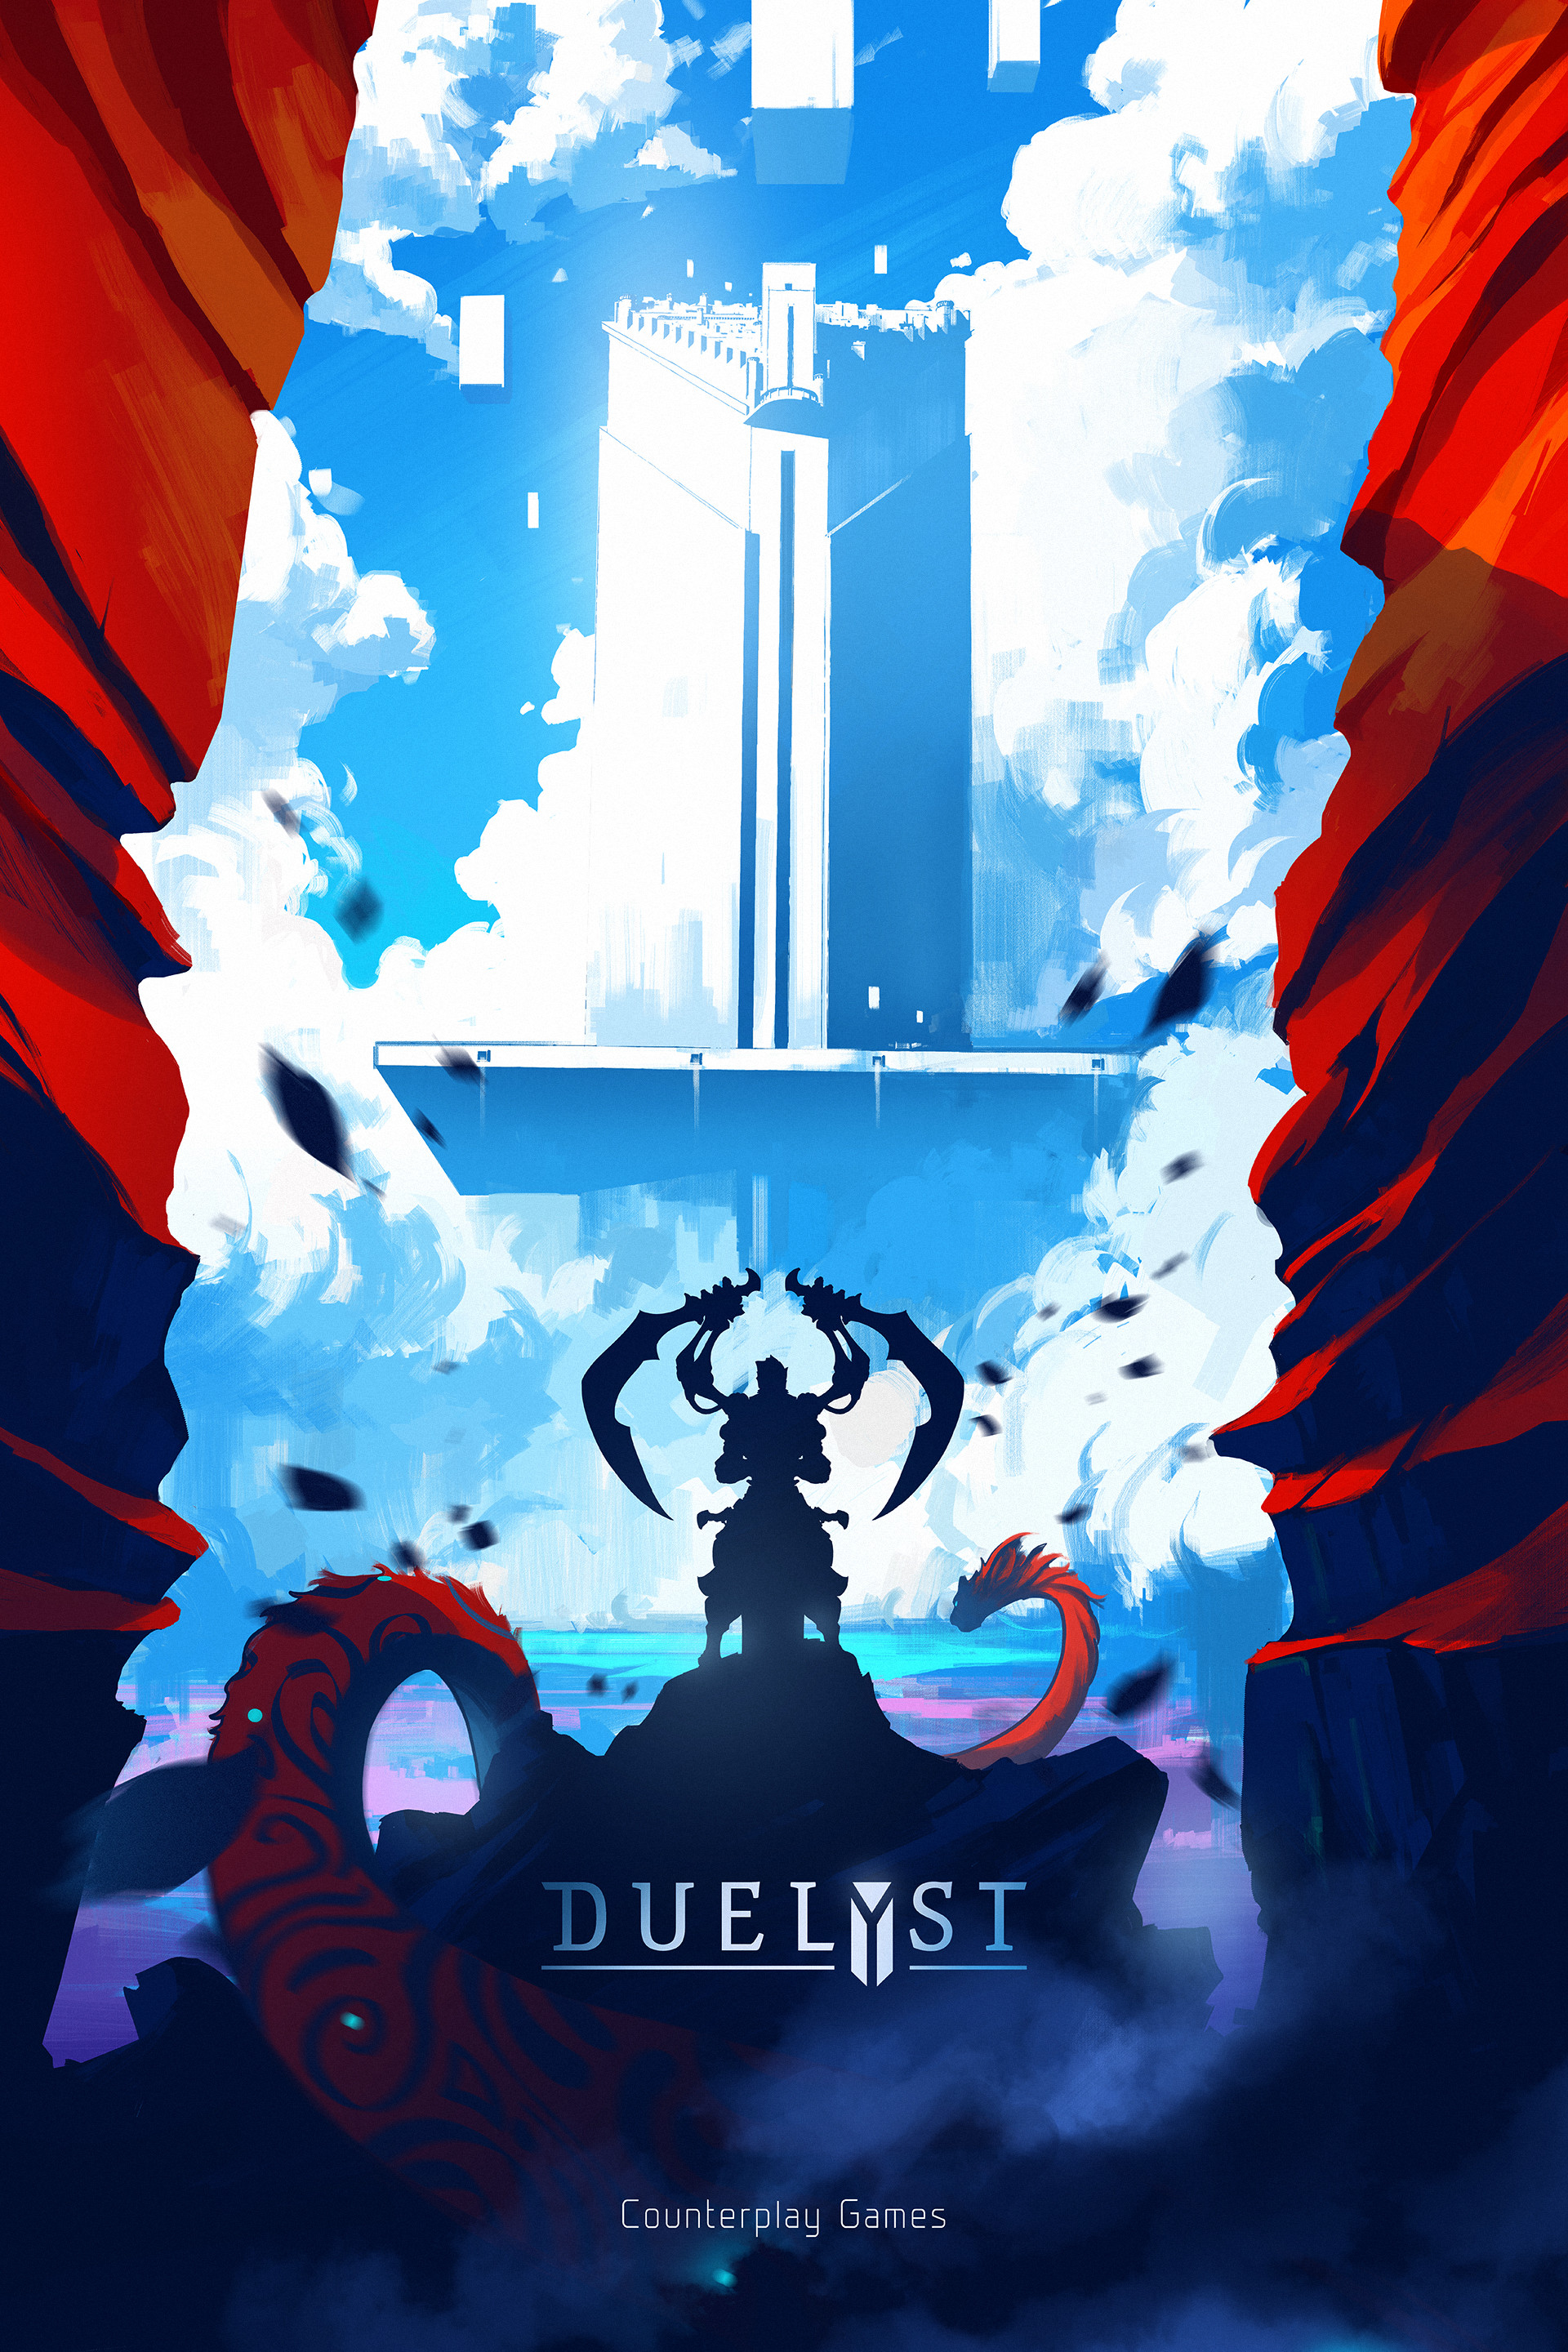 Check Out This Gorgeous Art From Tactical Strategy Game Duelyst - GameSpot